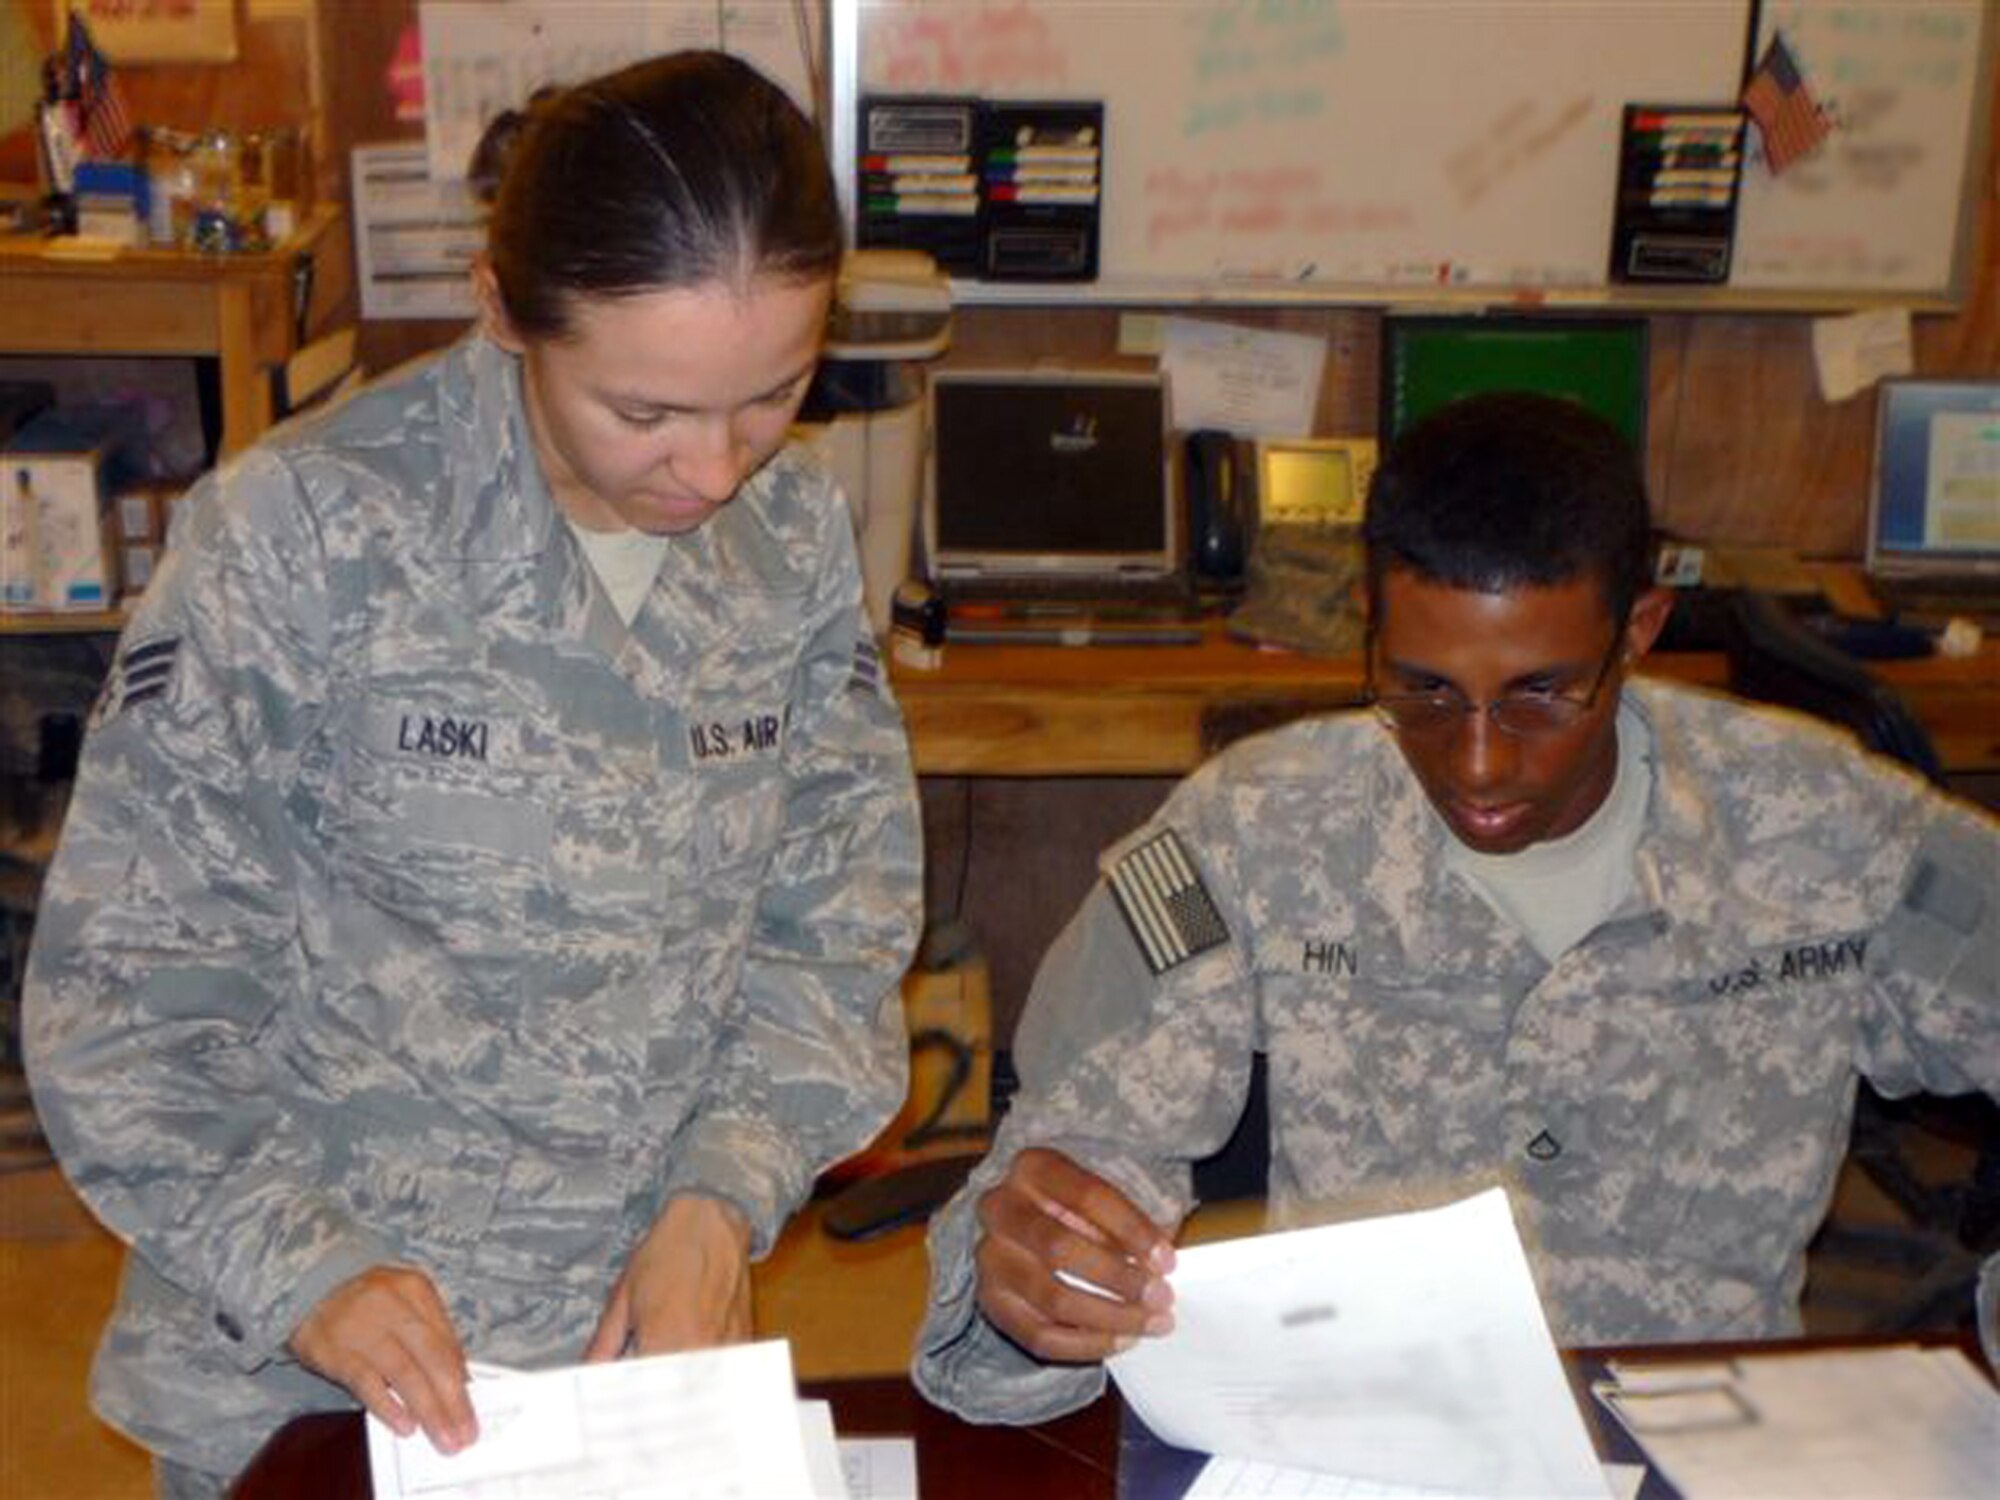 CAMP BUCCA, Iraq -- Senior Airman Angie Laski, 732nd Movement Control Team operations specialist and Pfc. Edwin Hines, 36th Sustainment Brigade liaison officer, verify trip tickets for cargo slated to depart Camp Bucca, Iraq, on the Basra sustainment convoy Sept. 27, 2009. Airman Laski is deployed from the 305th Aerial Port Squadron at McGuire Air Force Base, NJ. Pfc. Hines is deployed with the Texas Army National Guard from Temple, Texas. (U.S. Air Force photo/Senior Master Sgt. Jeff Criger)
